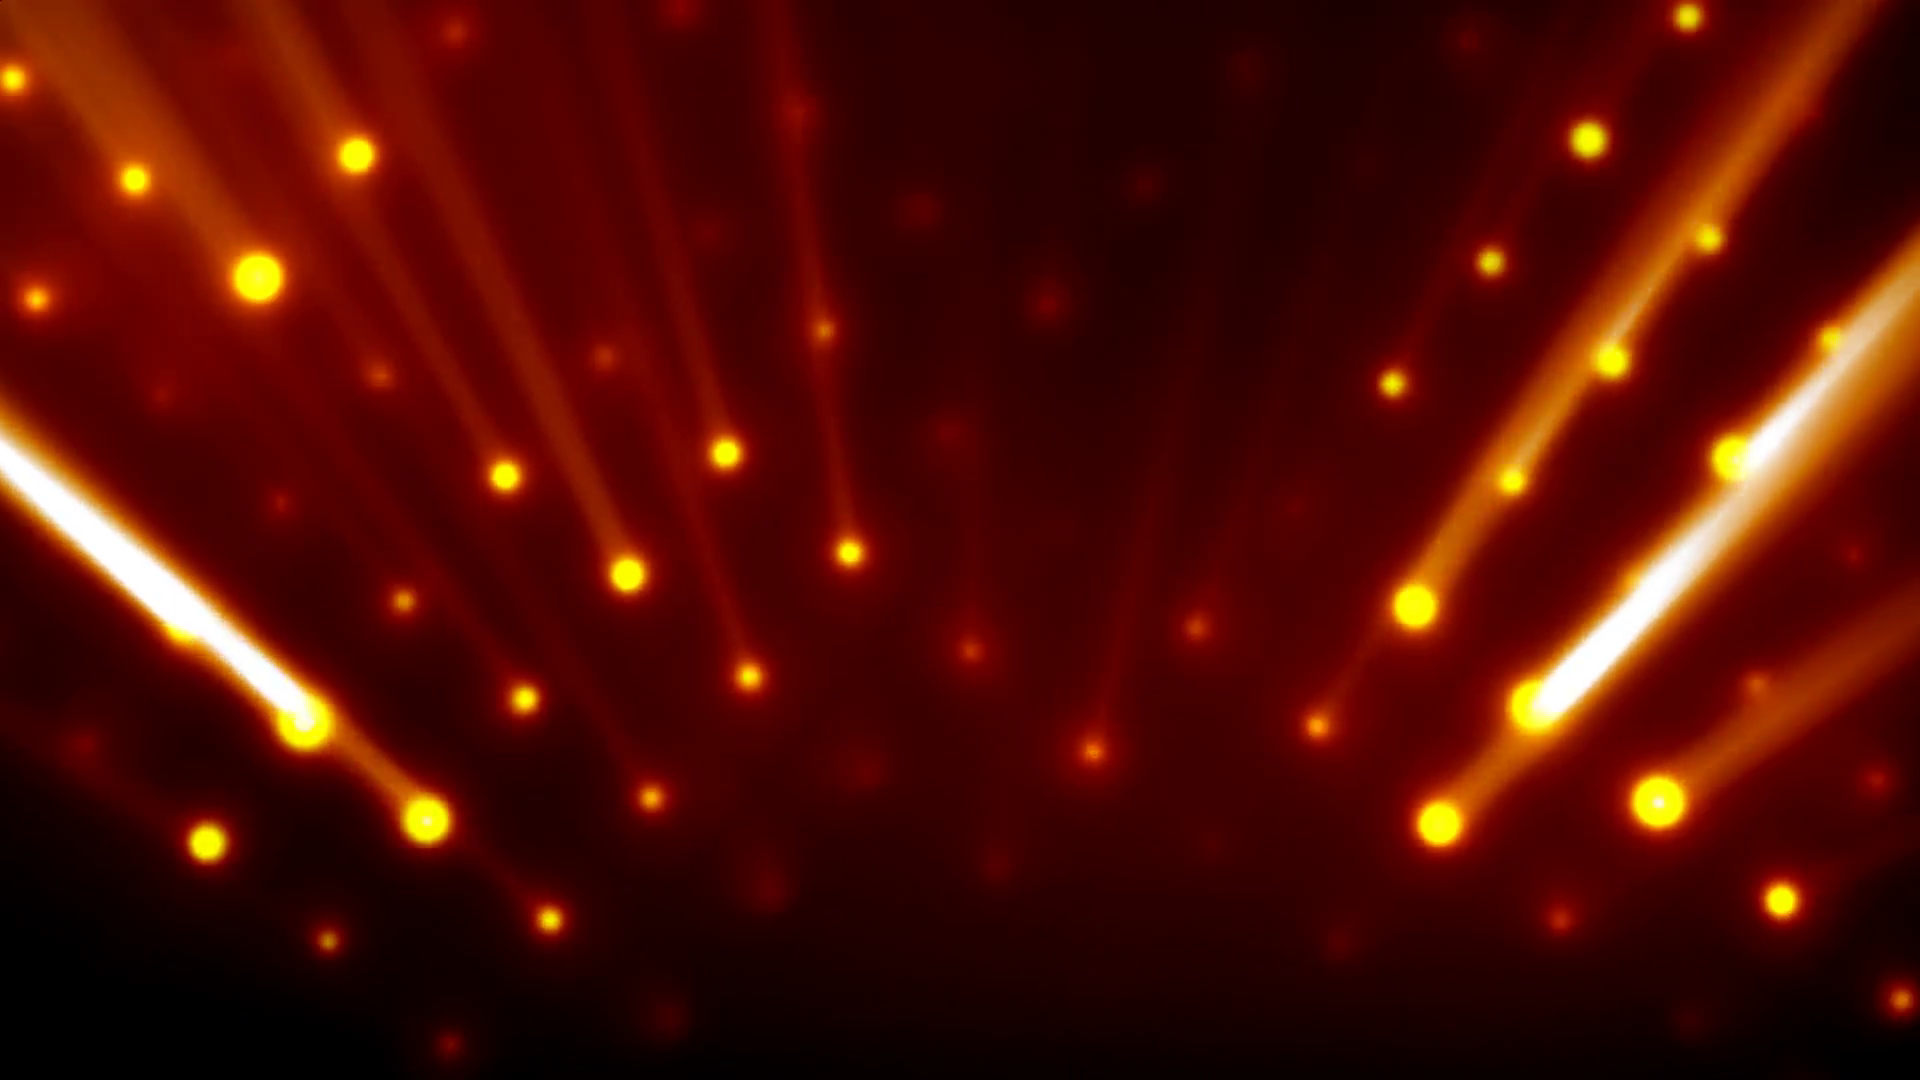 Stage Lights 2 Loopable Background Motion Background - Videoblocks